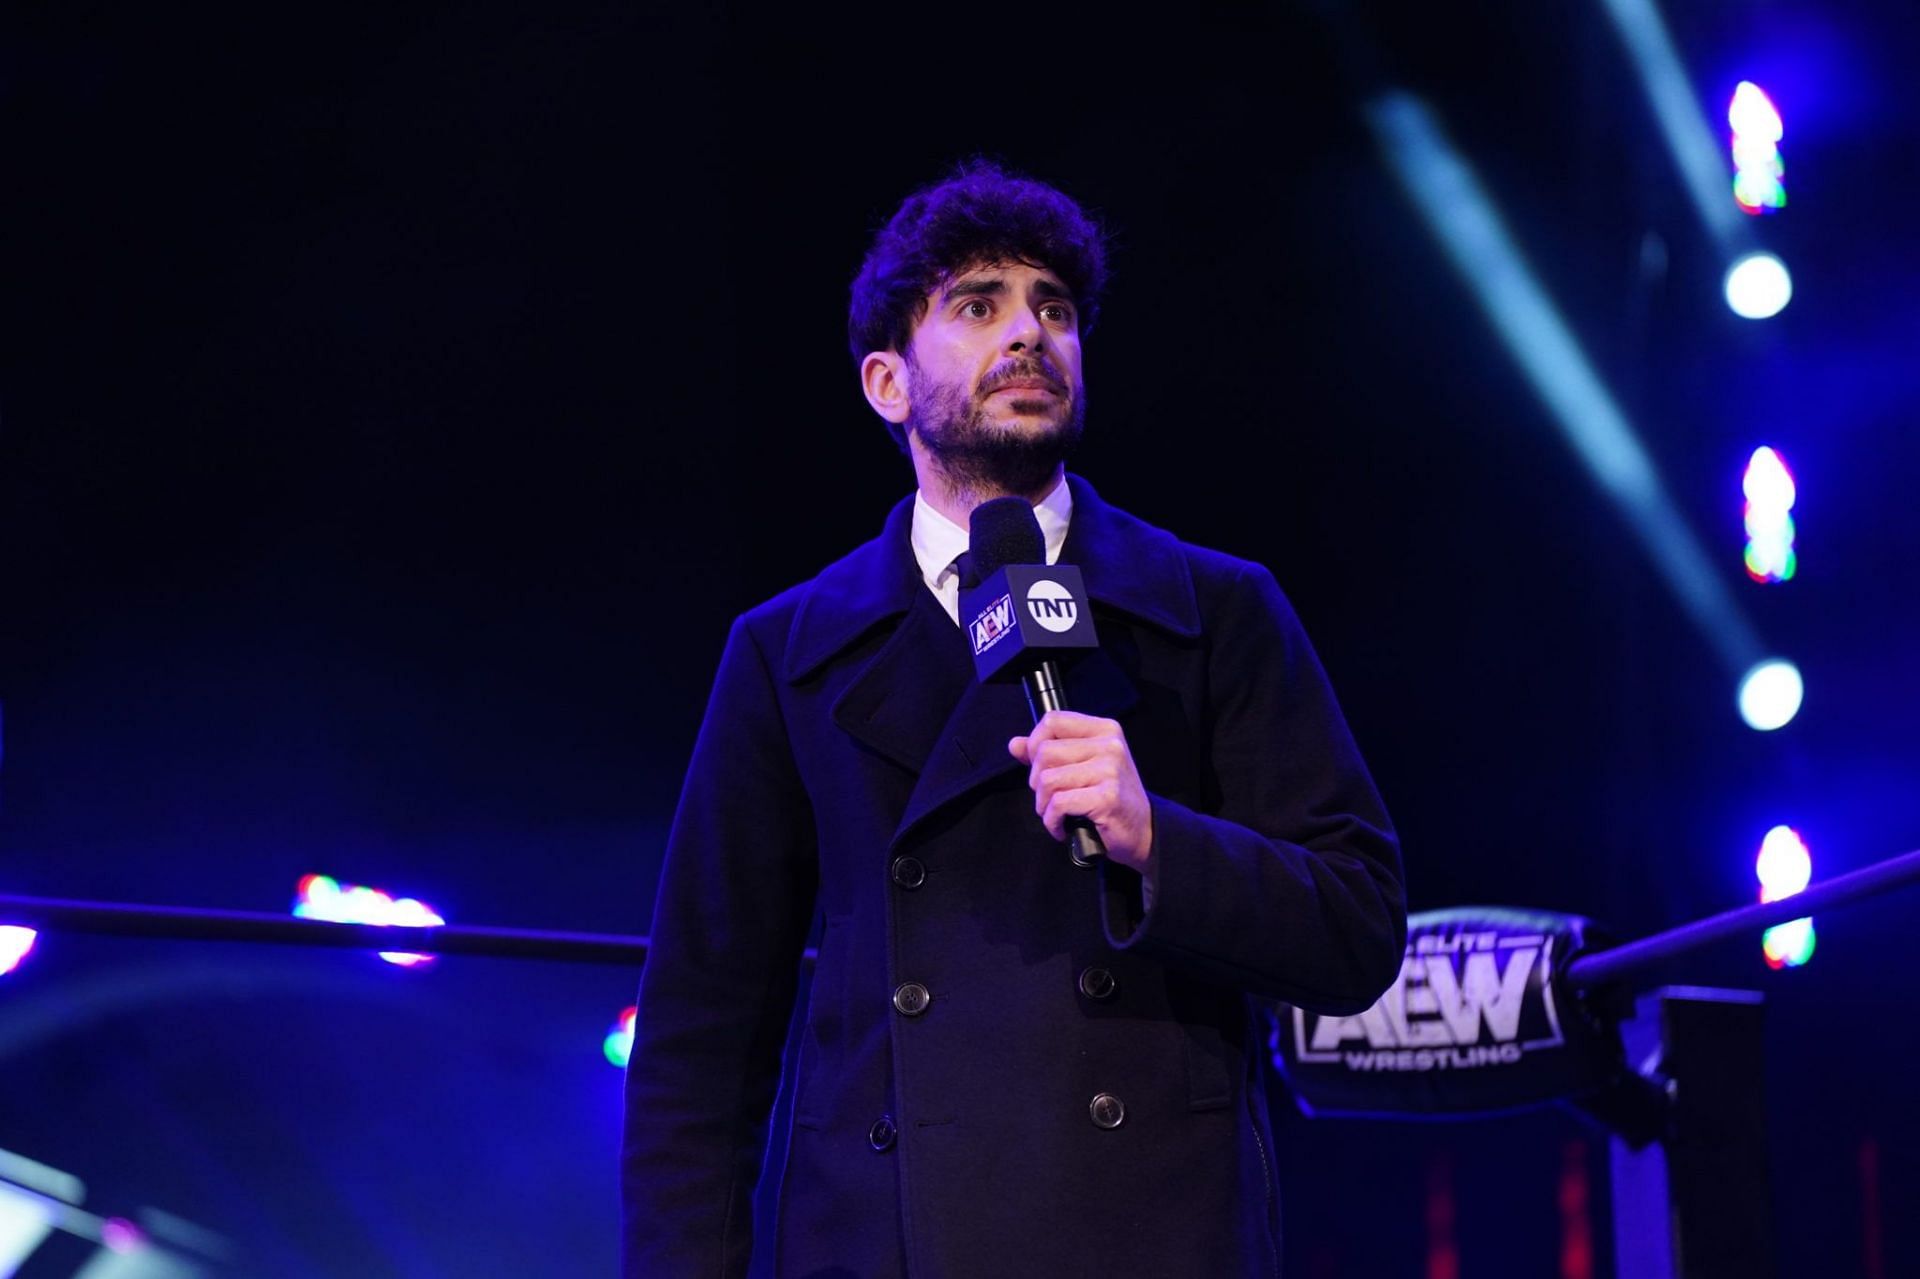 Tony Khan would hope AEW bounces back from the rating slump!